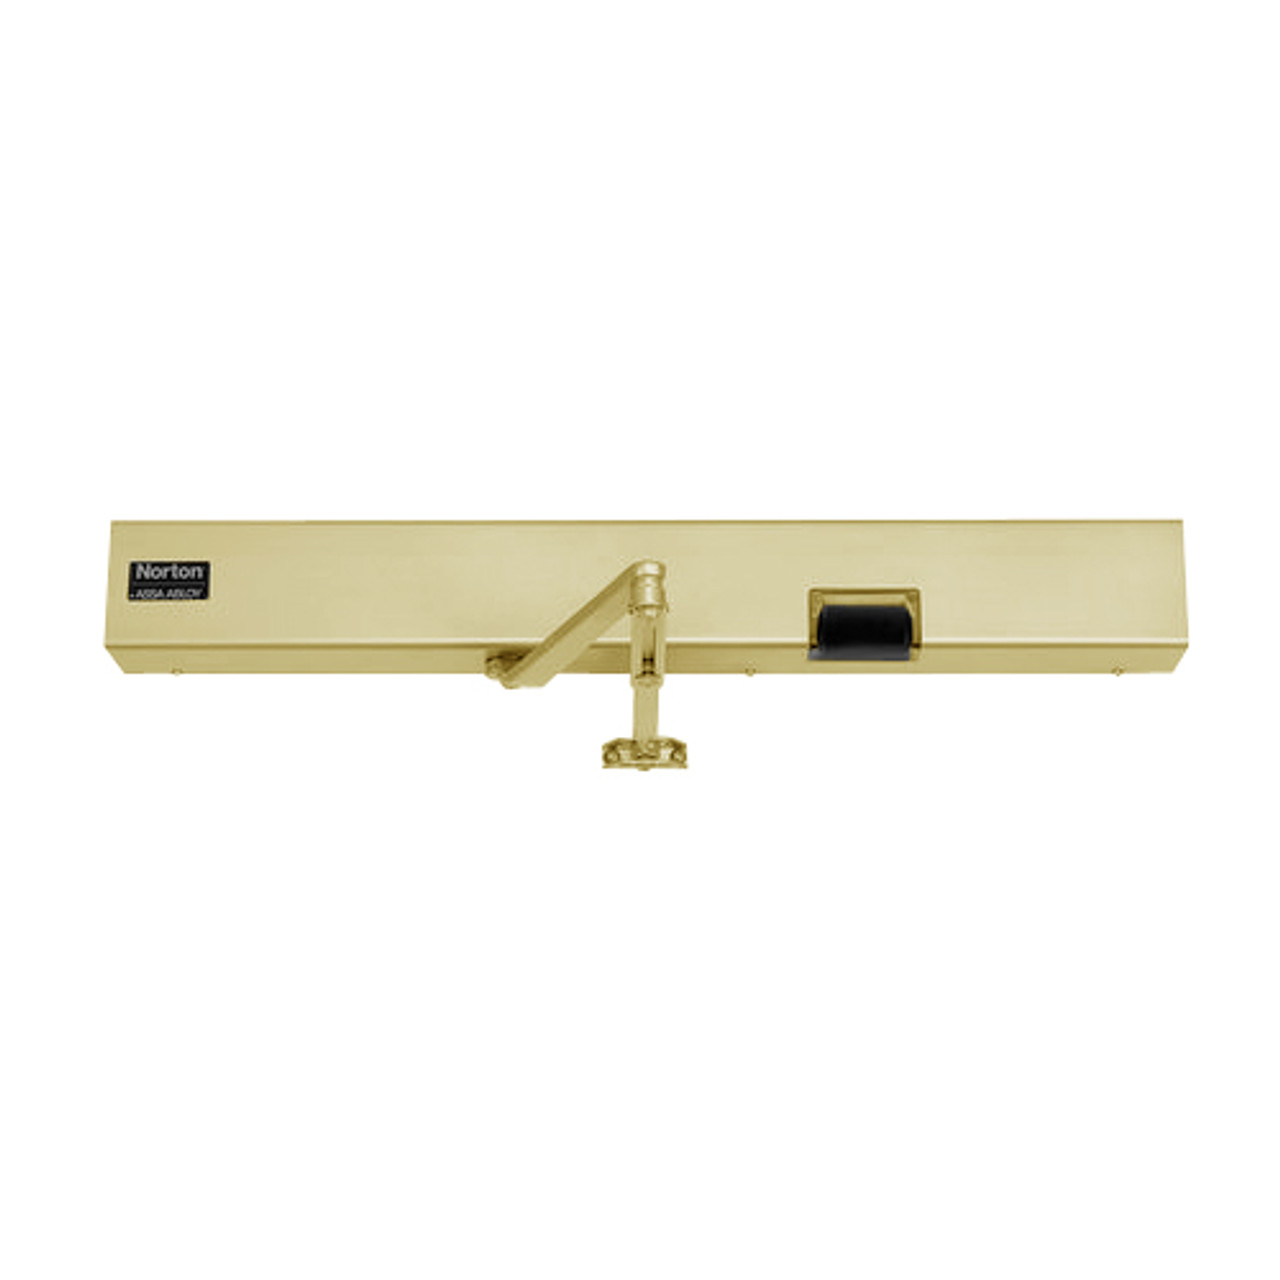 7124SZ-DZ-LH-120VAC-696 Norton 7100SZ Series Safe Zone Multi-Point Closer/Holder with Motion Sensor and Push Side Double Lever 11 inch Main Arm in Gold Finish